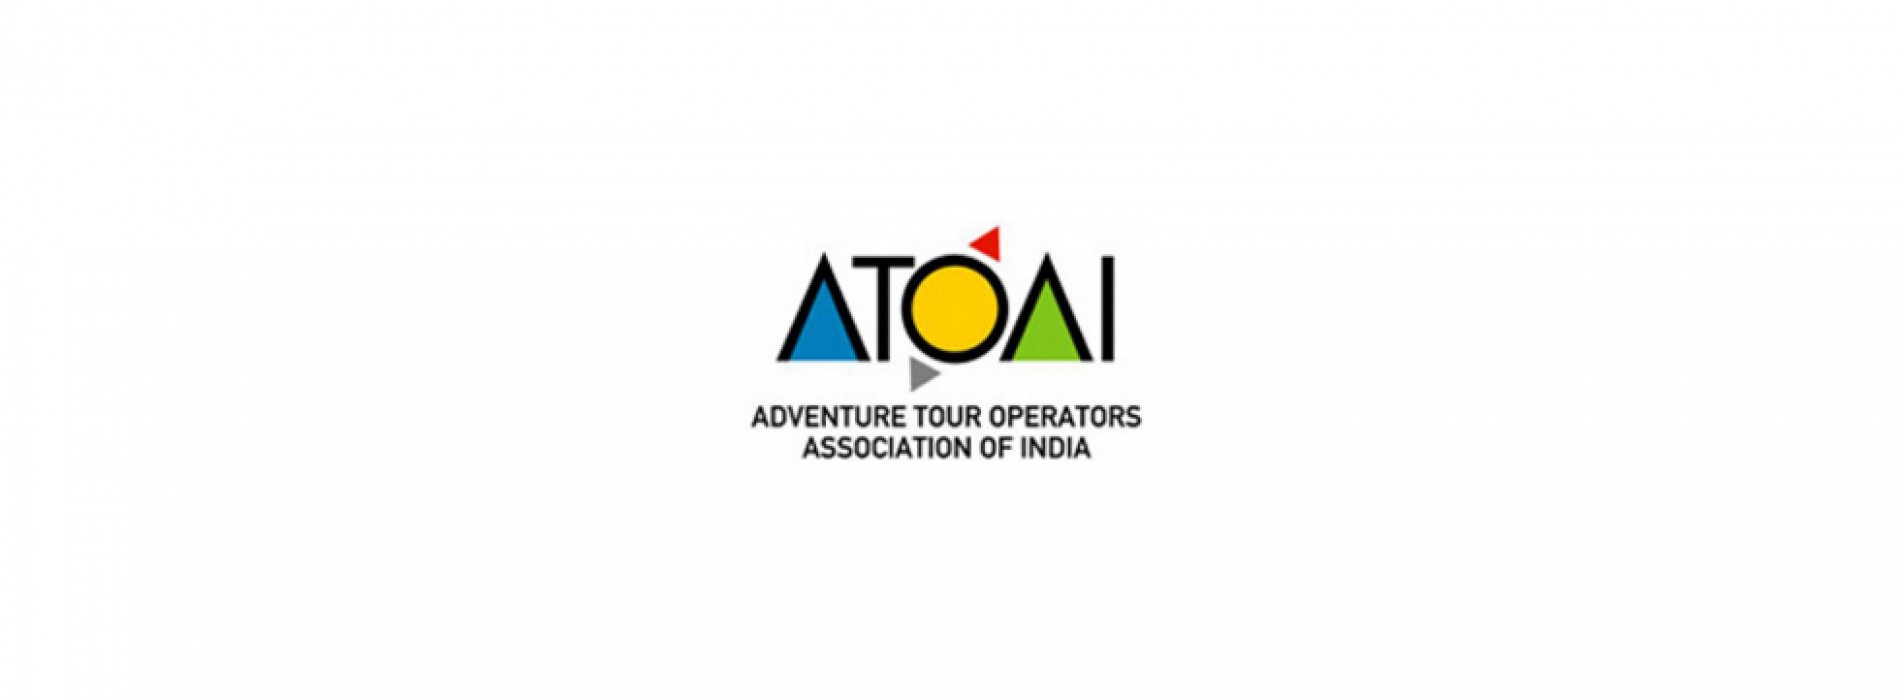 ATOAI elects new Office Bearers and EC team for years 2016-18